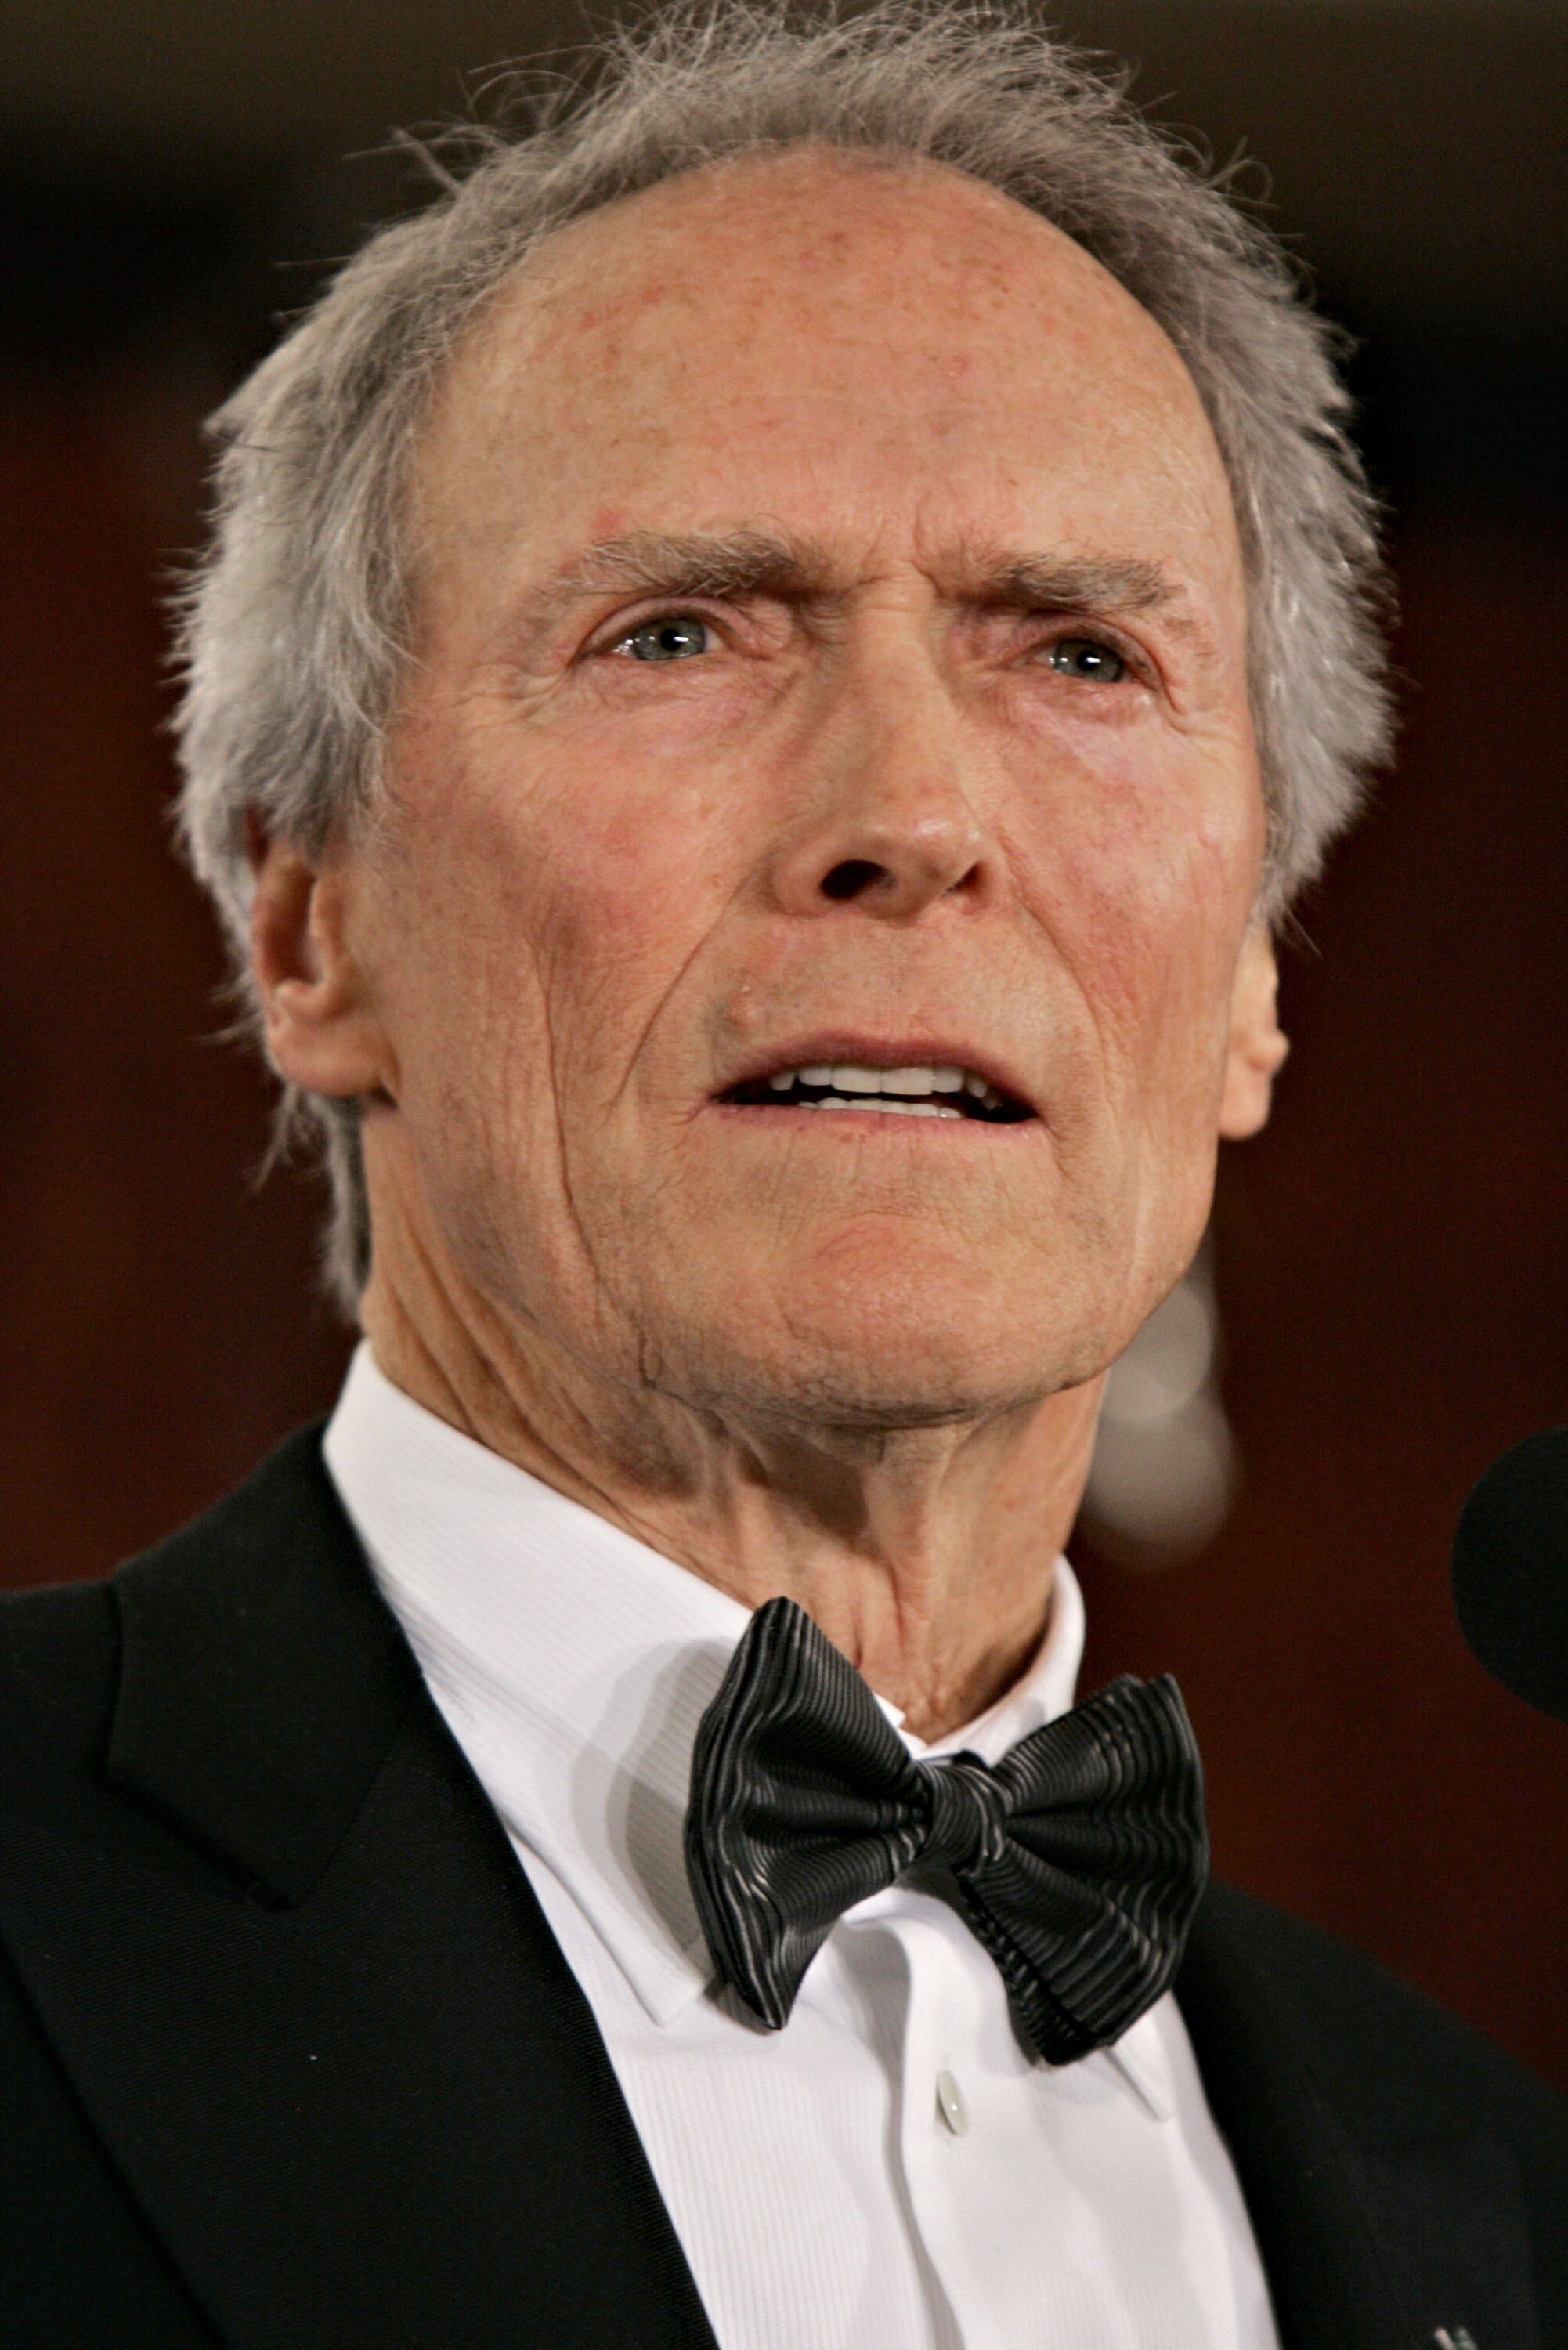 Clint Eastwood speaks after accepting his Lifetime Achievement Award in the press room during the 58th Annual Directors Guild Of America Awards held at Hyatt Regency Century Plaza on January 28, 2006 in Los Angeles, California. | Source: Getty Images